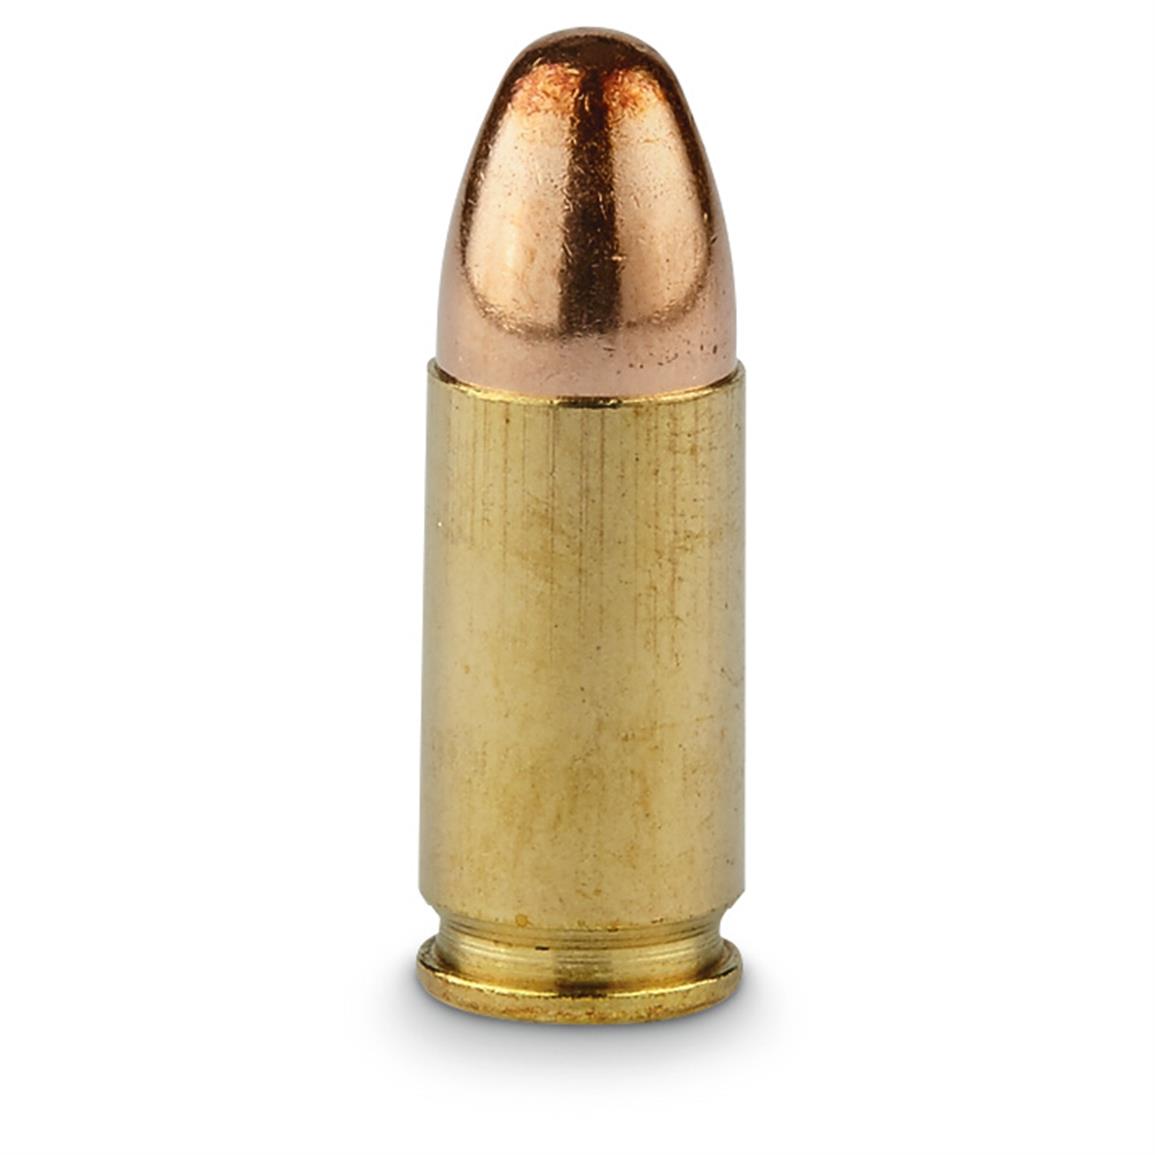 PPU, 9mm Luger, FMJ, 124 Grain, 50 Rounds - 222473, 9mm Ammo at ...